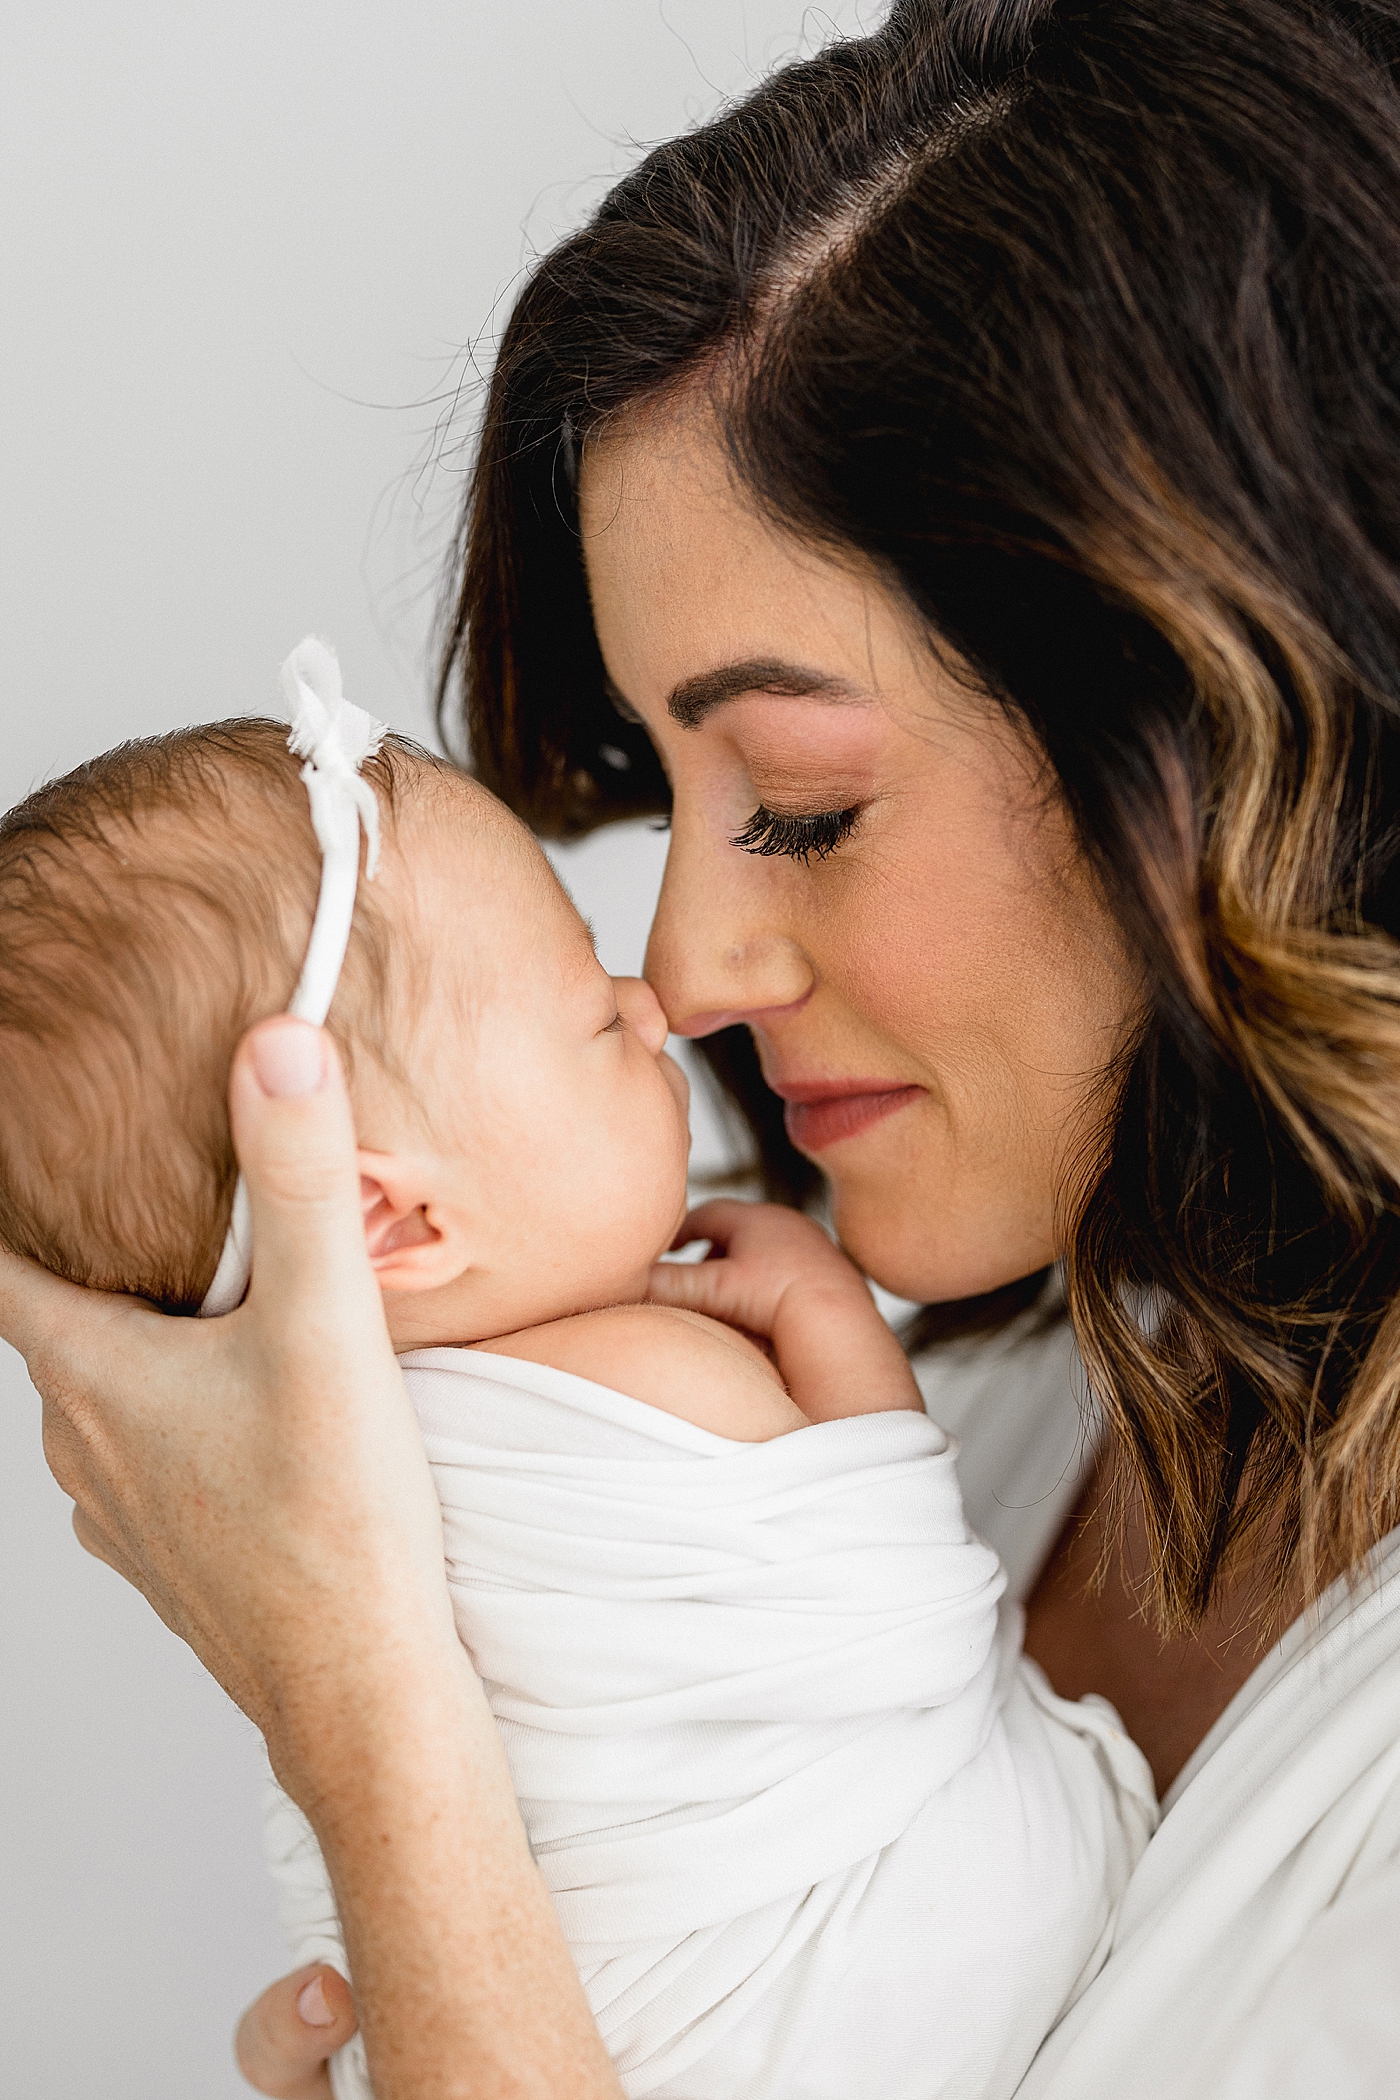 Mom nose-to-nose with daughter. Photo by Brittany Elise Photography.